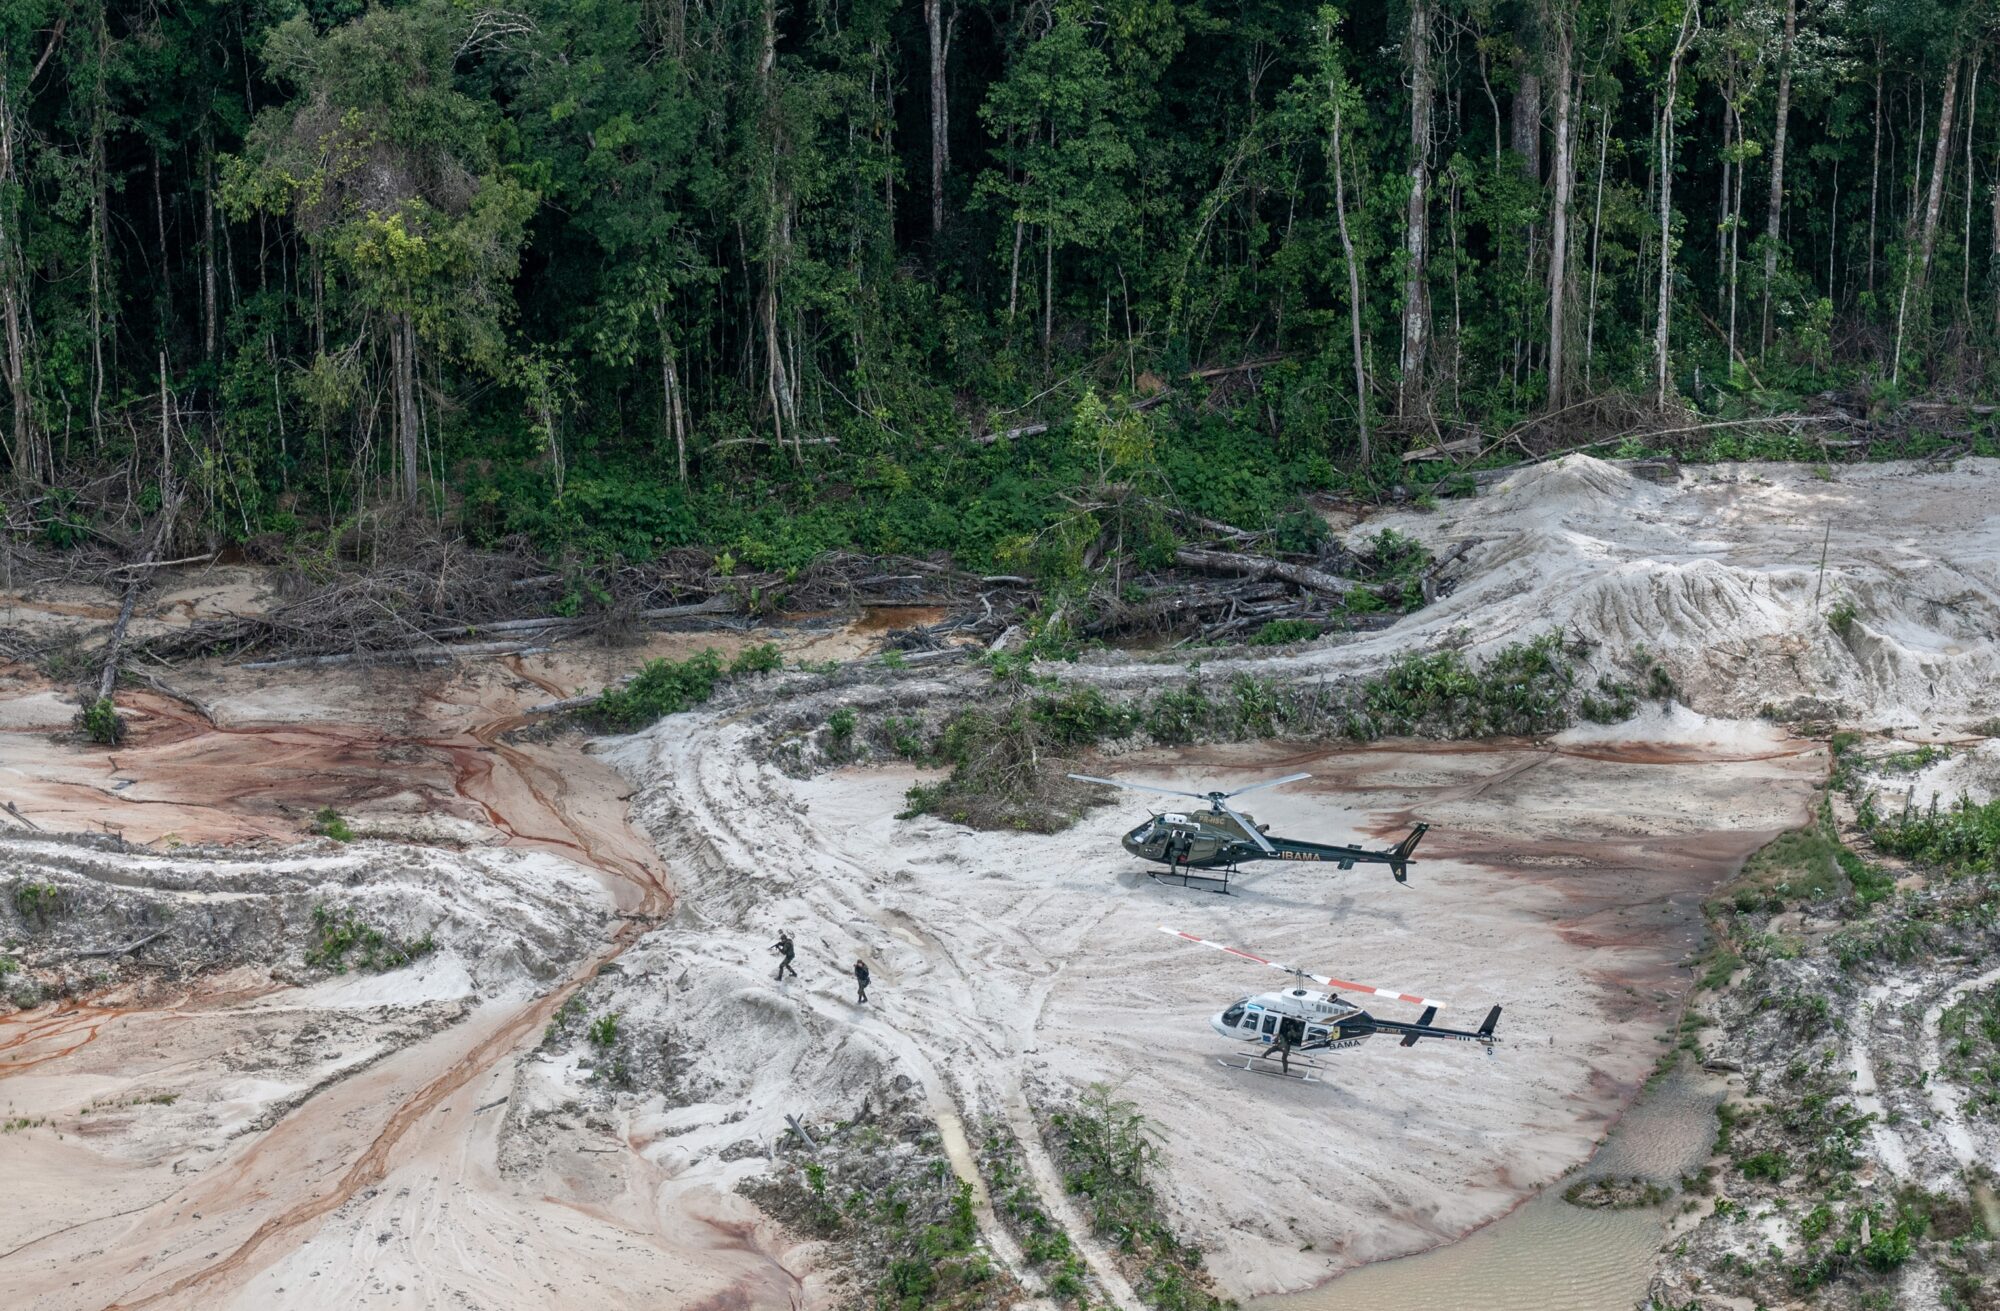 <p>Officers from IBAMA, Brazil’s environmental enforcement agency, land at an illegal mining site in the Munduruku Indigenous Territory, Pará state (Image: <a href="https://www.flickr.com/photos/ibamagov/42127291715/in/album-72157682274802094/">Vinícius Mendonça</a> / <a href="https://www.flickr.com/people/ibamagov/">IBAMA</a>, <a href="https://creativecommons.org/licenses/by-sa/2.0/">CC BY-SA</a>)</p>